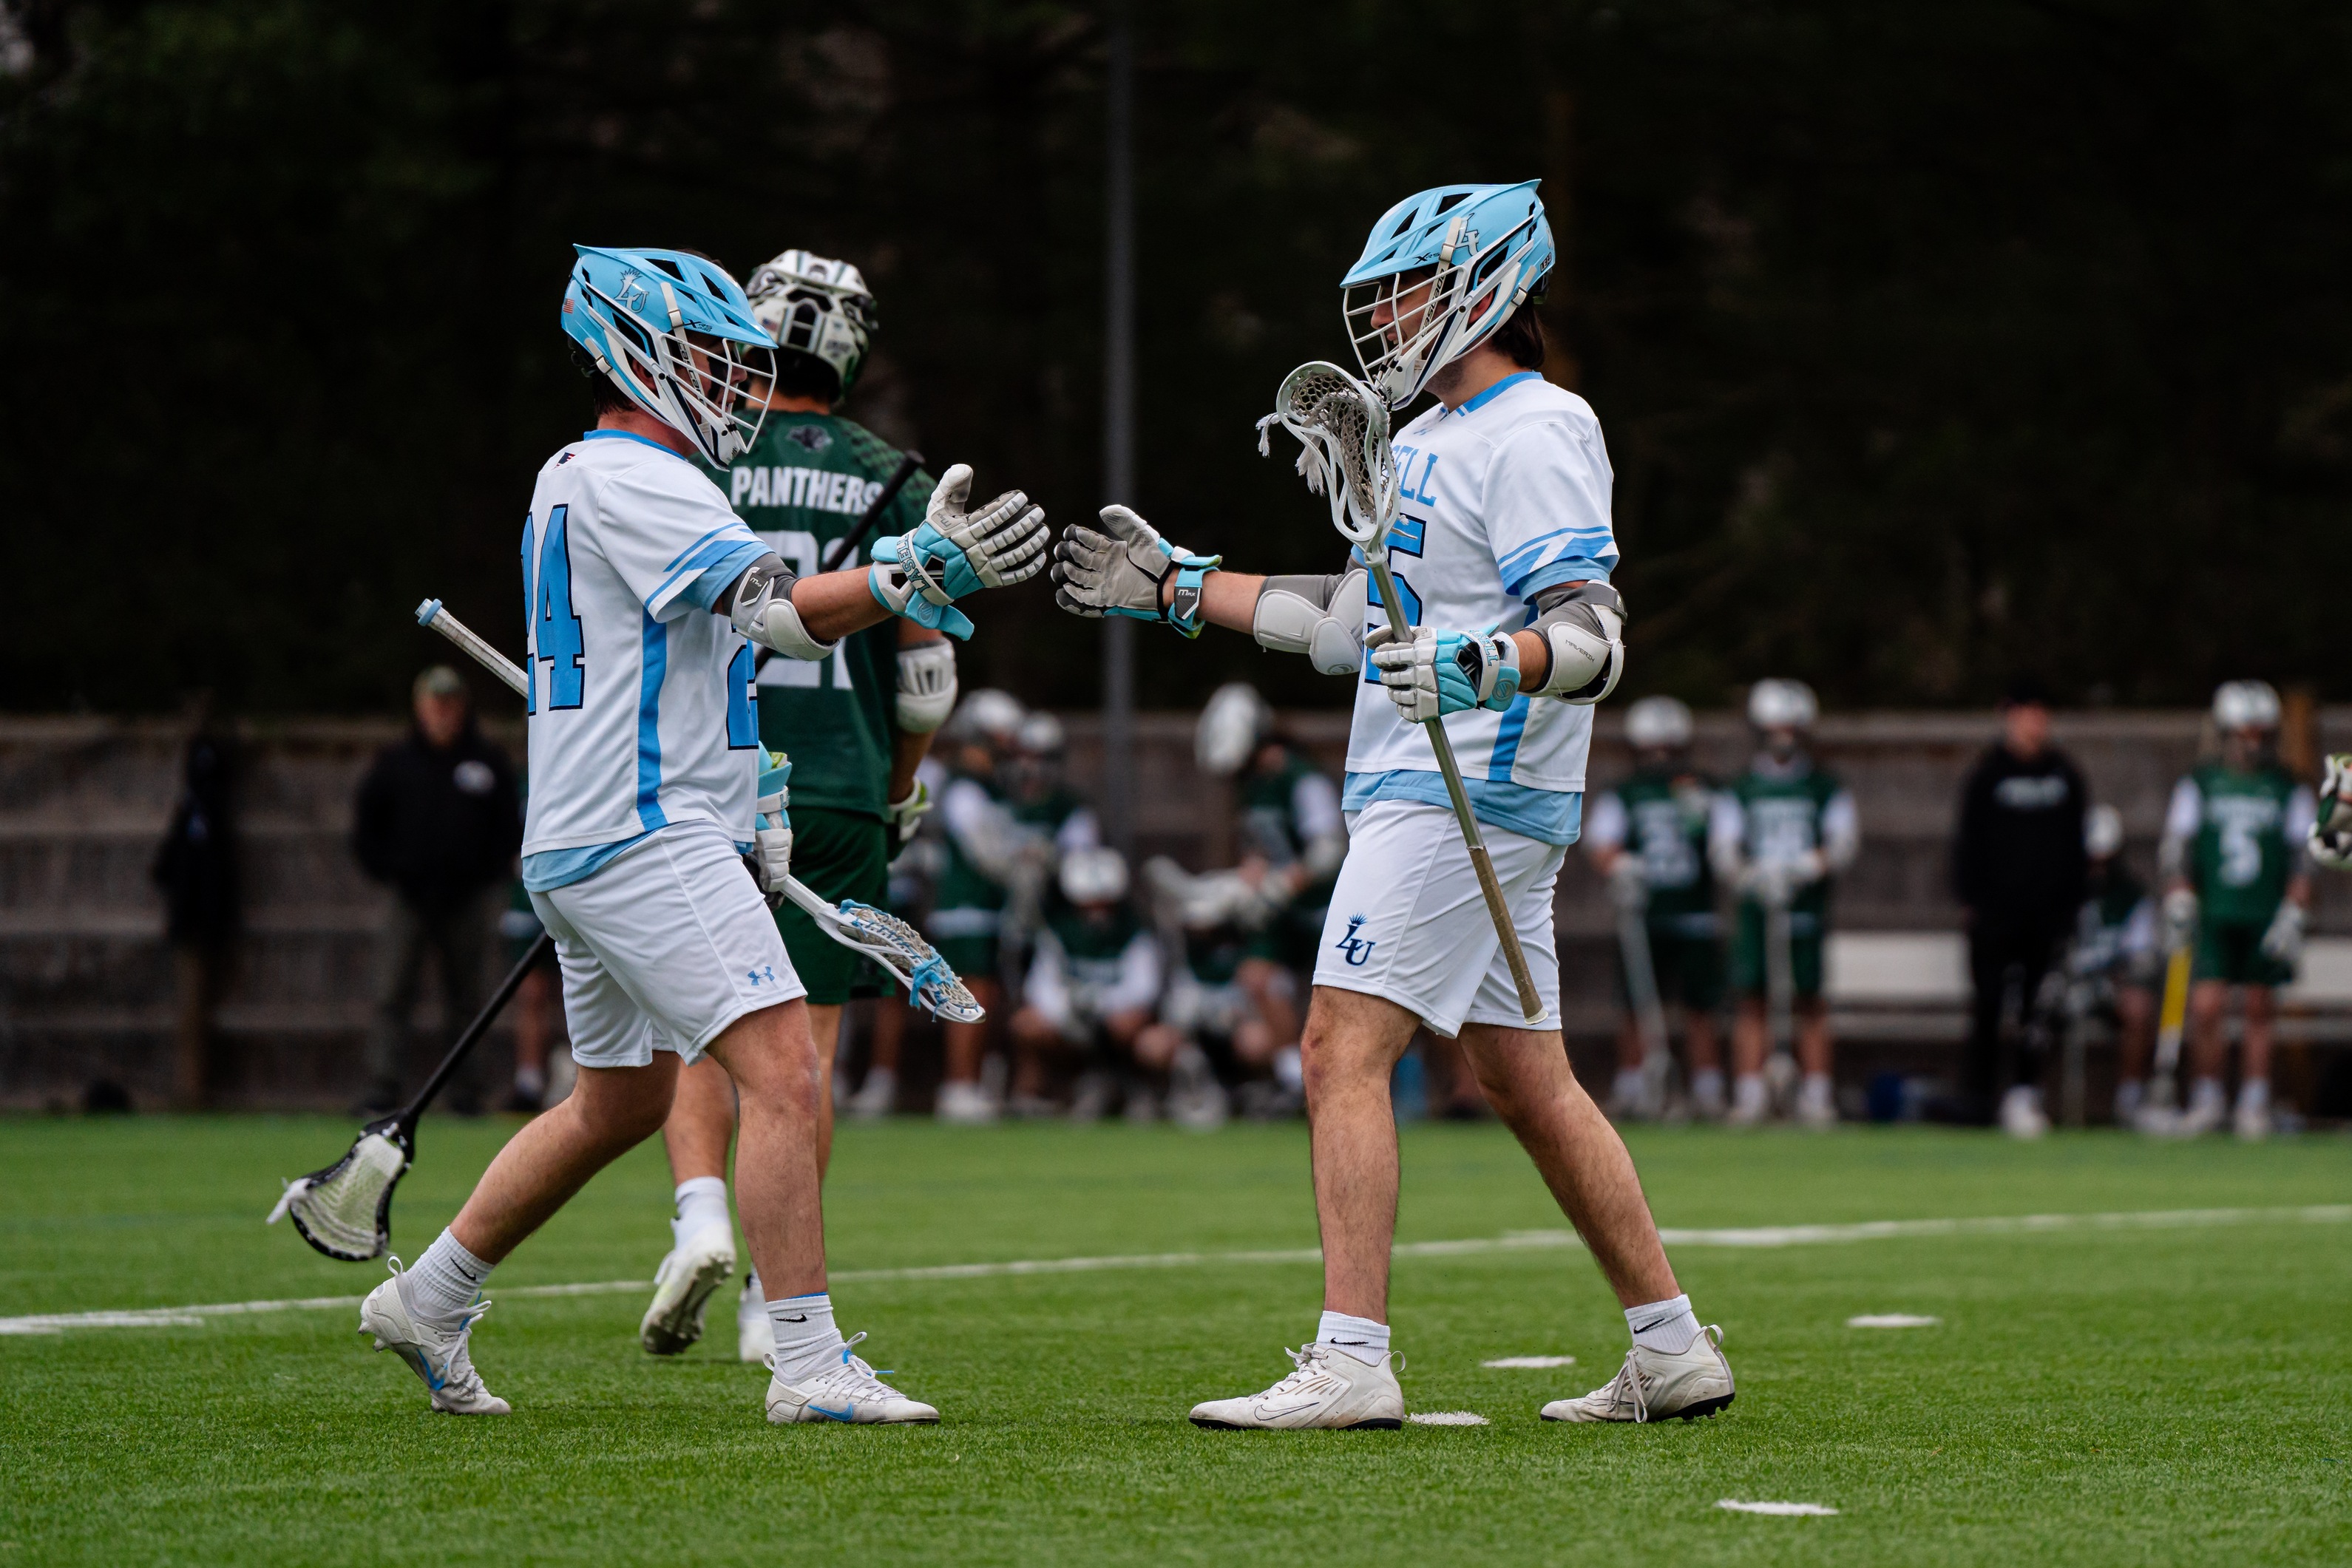 MLax: Lasers Break Single Game Goal Record with 29-1 Win